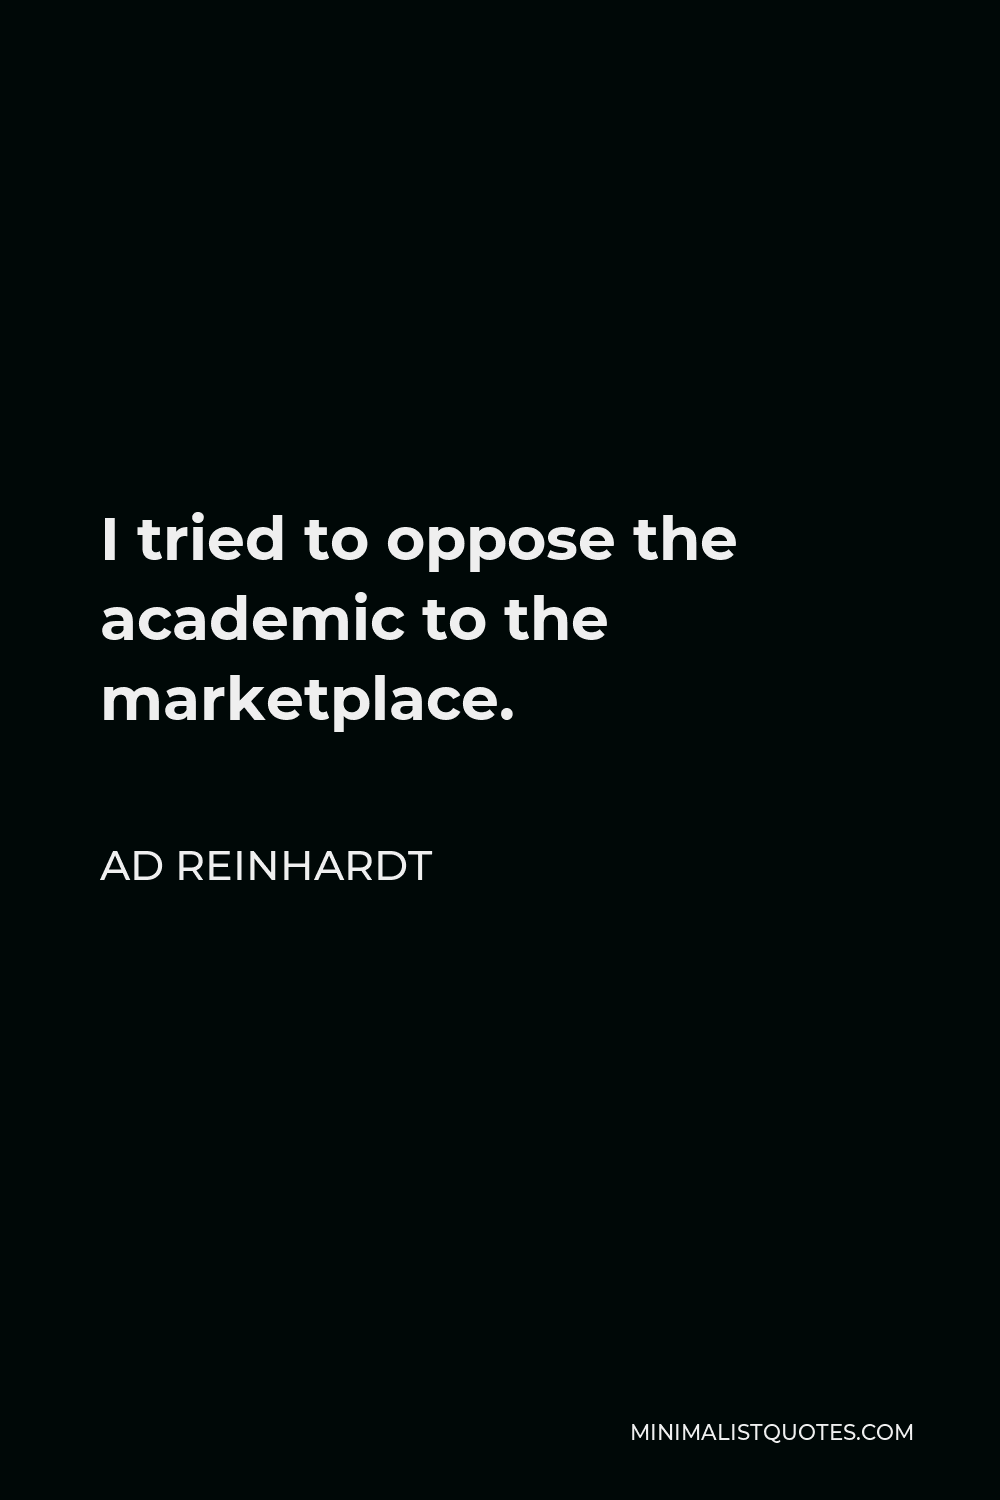 Ad Reinhardt Quote - I tried to oppose the academic to the marketplace.